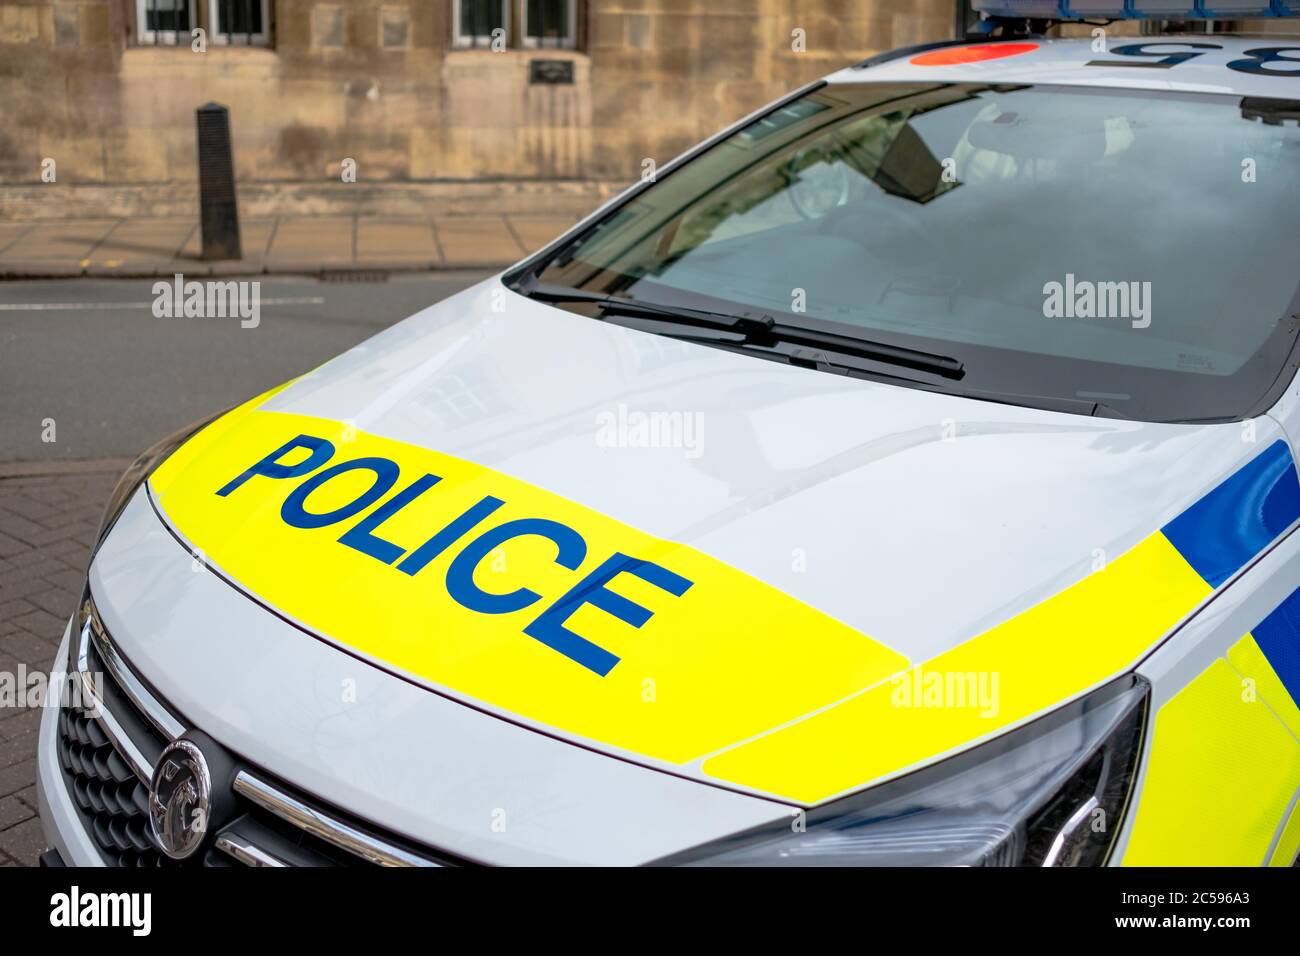 Detailed view of a British Police Vehicle seen parked near a busy street, responding to an emergency call. Detail of the hood and decals are evident. Stock Photo